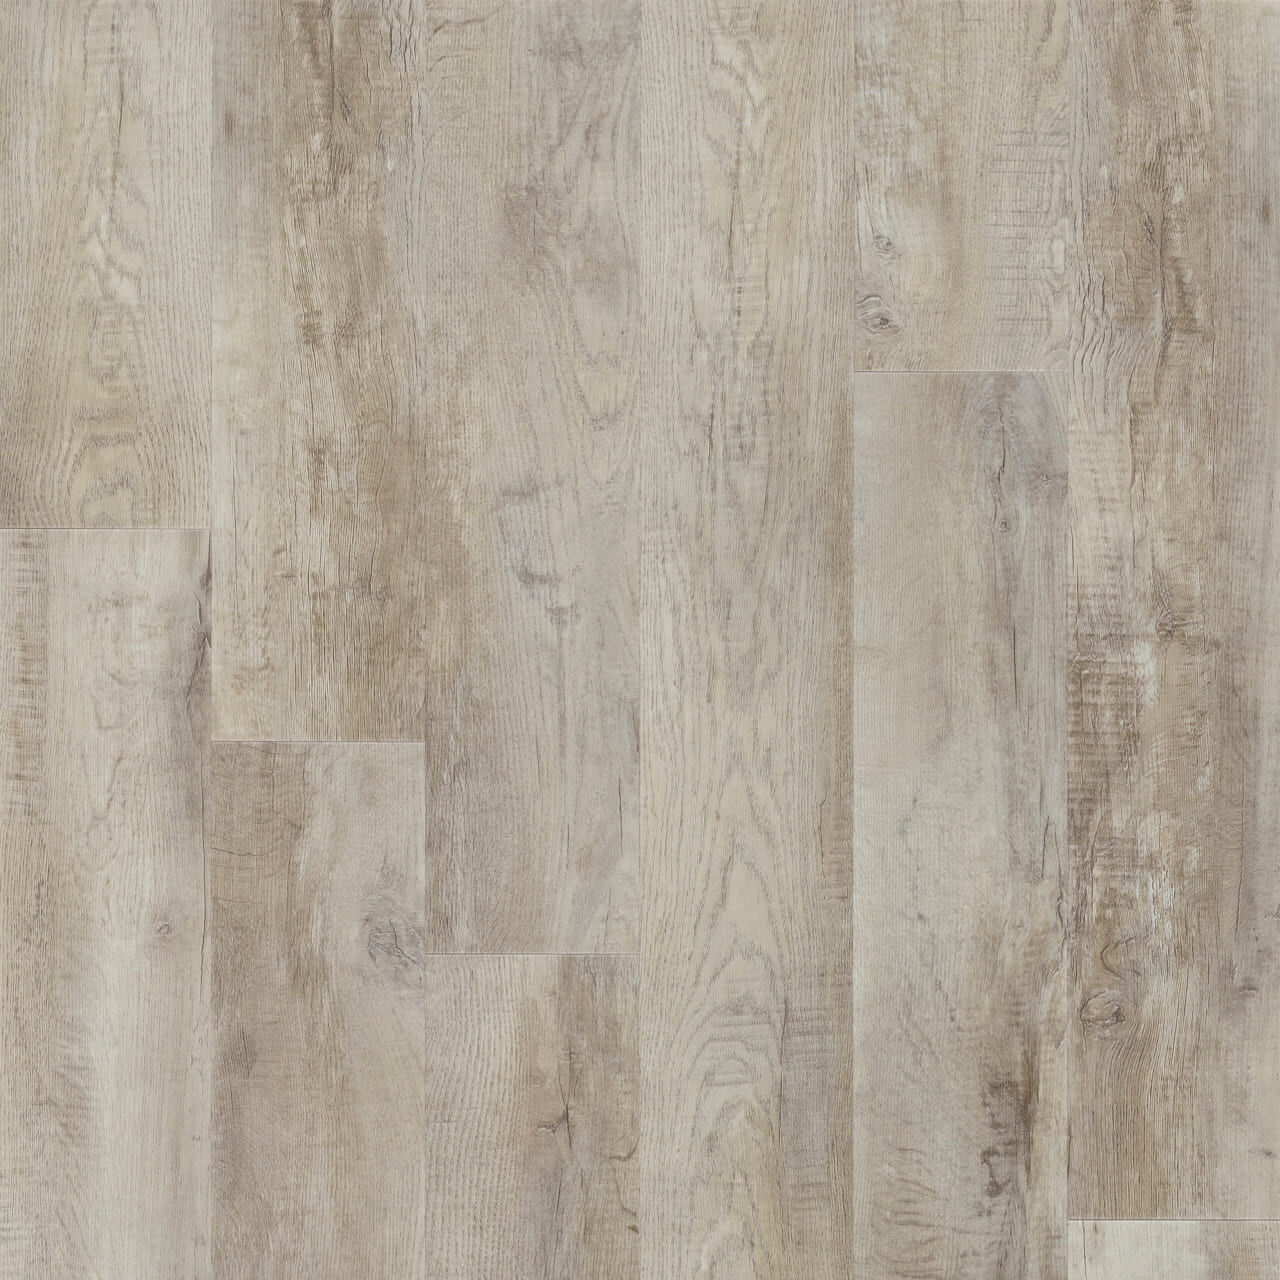 Moduleo 55 Roots Eir Country Oak 54925